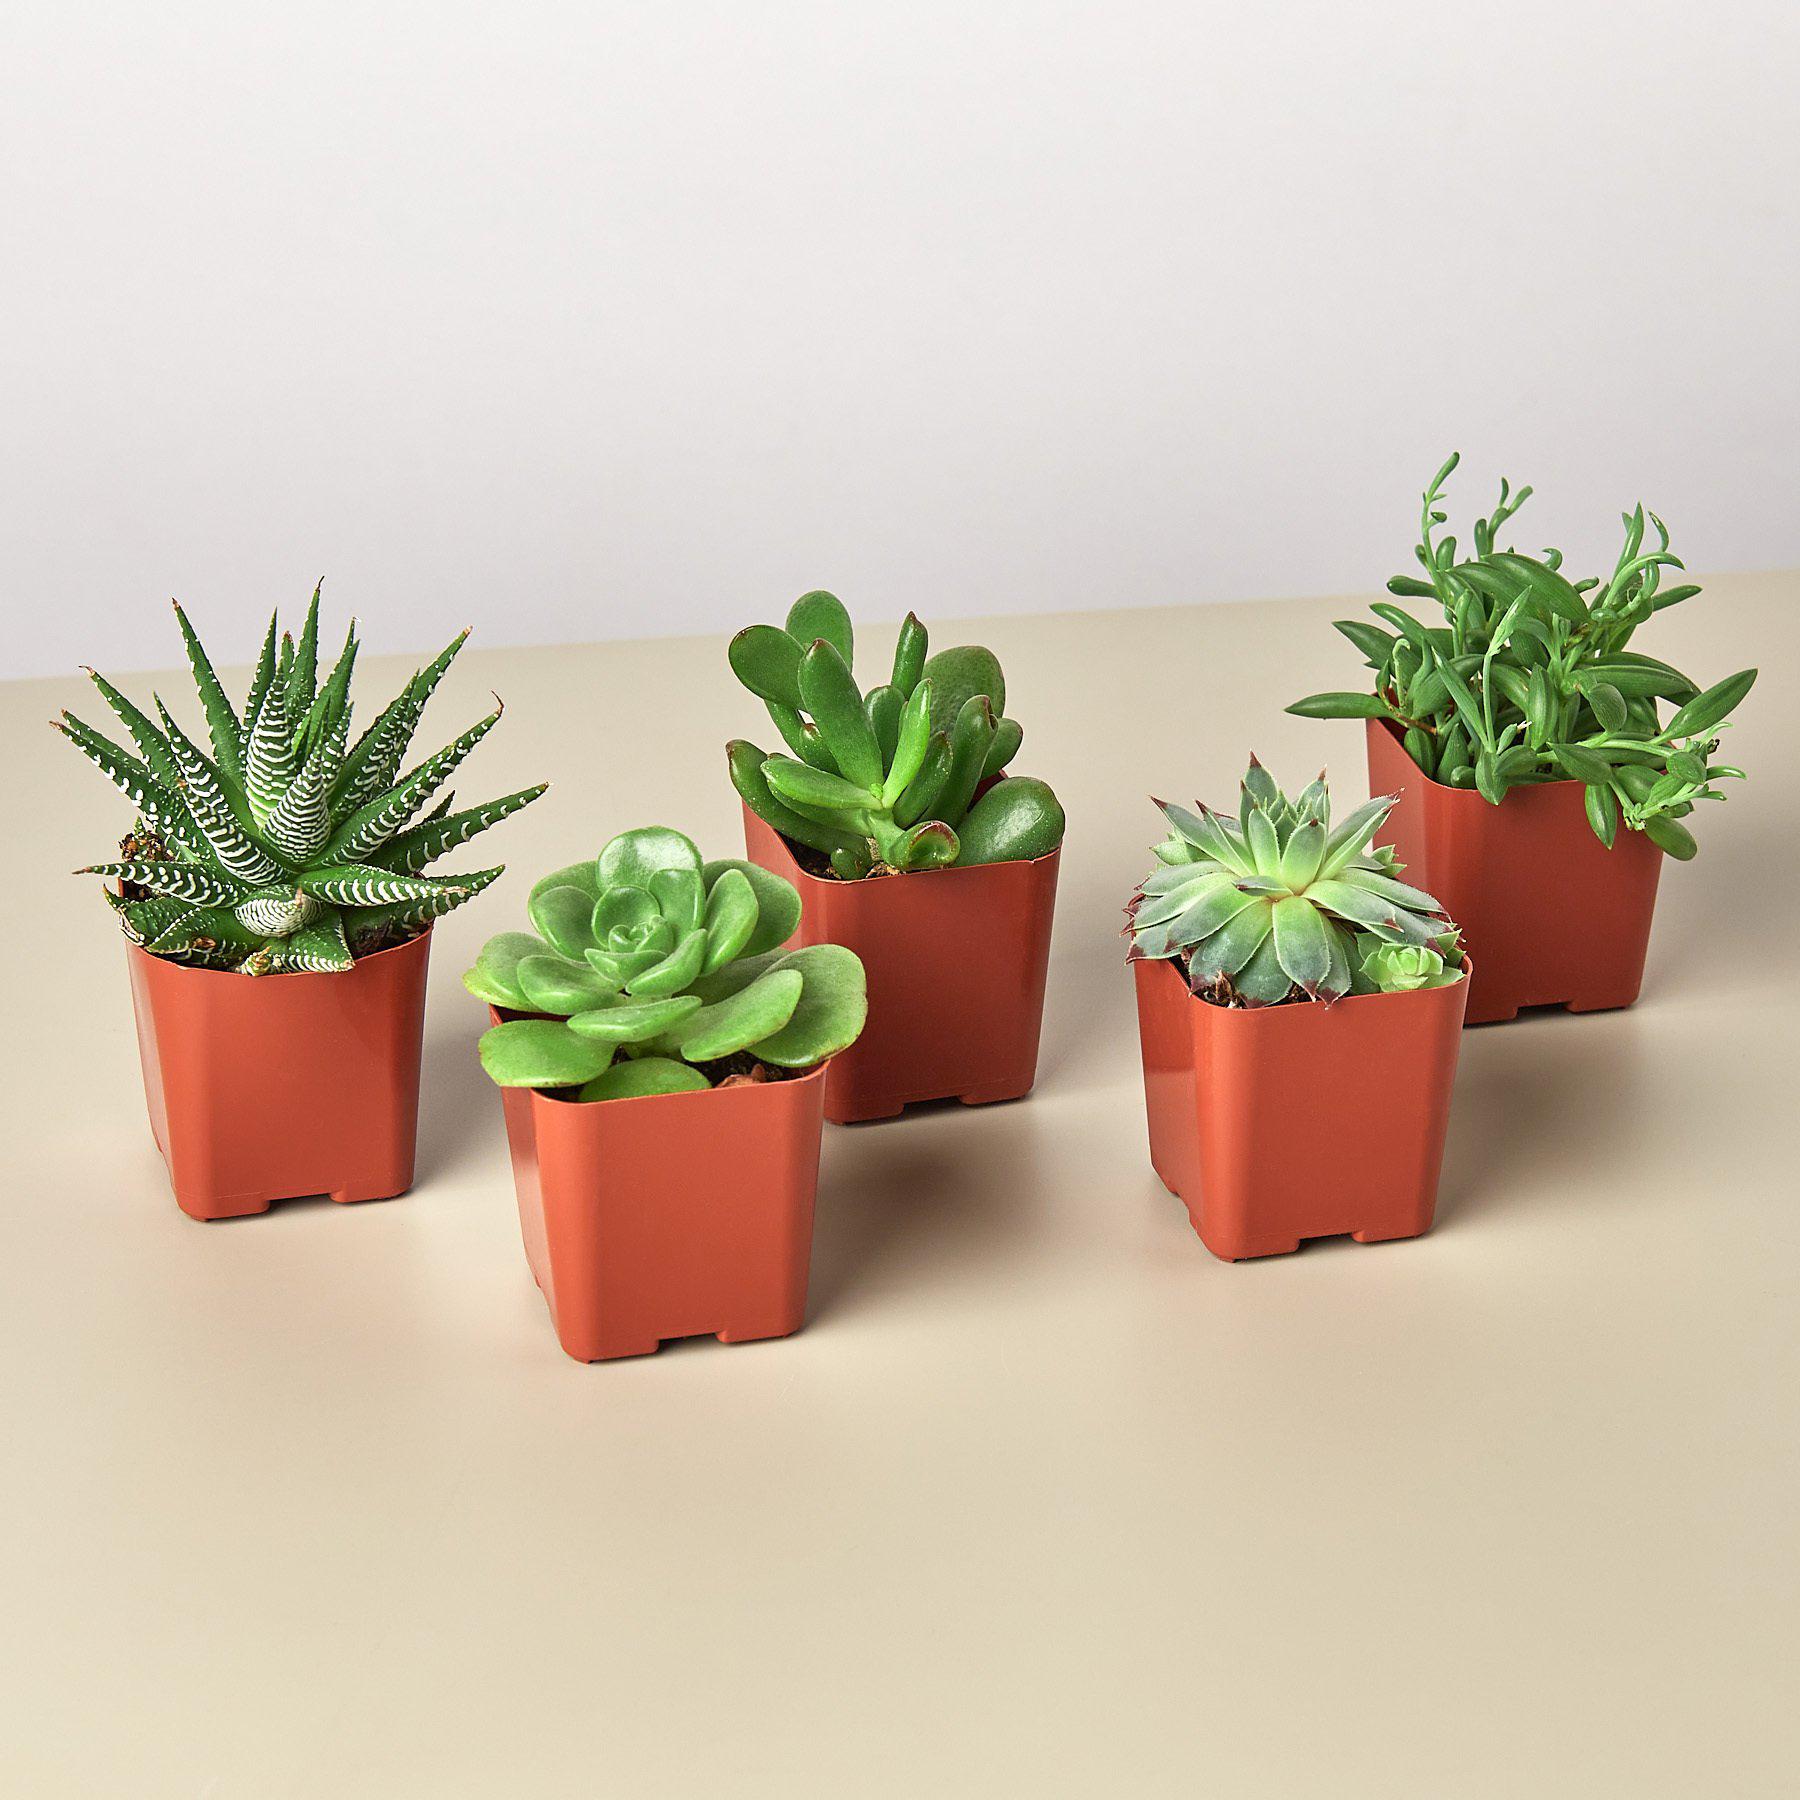 5 Succulent Variety Pack - 2.0